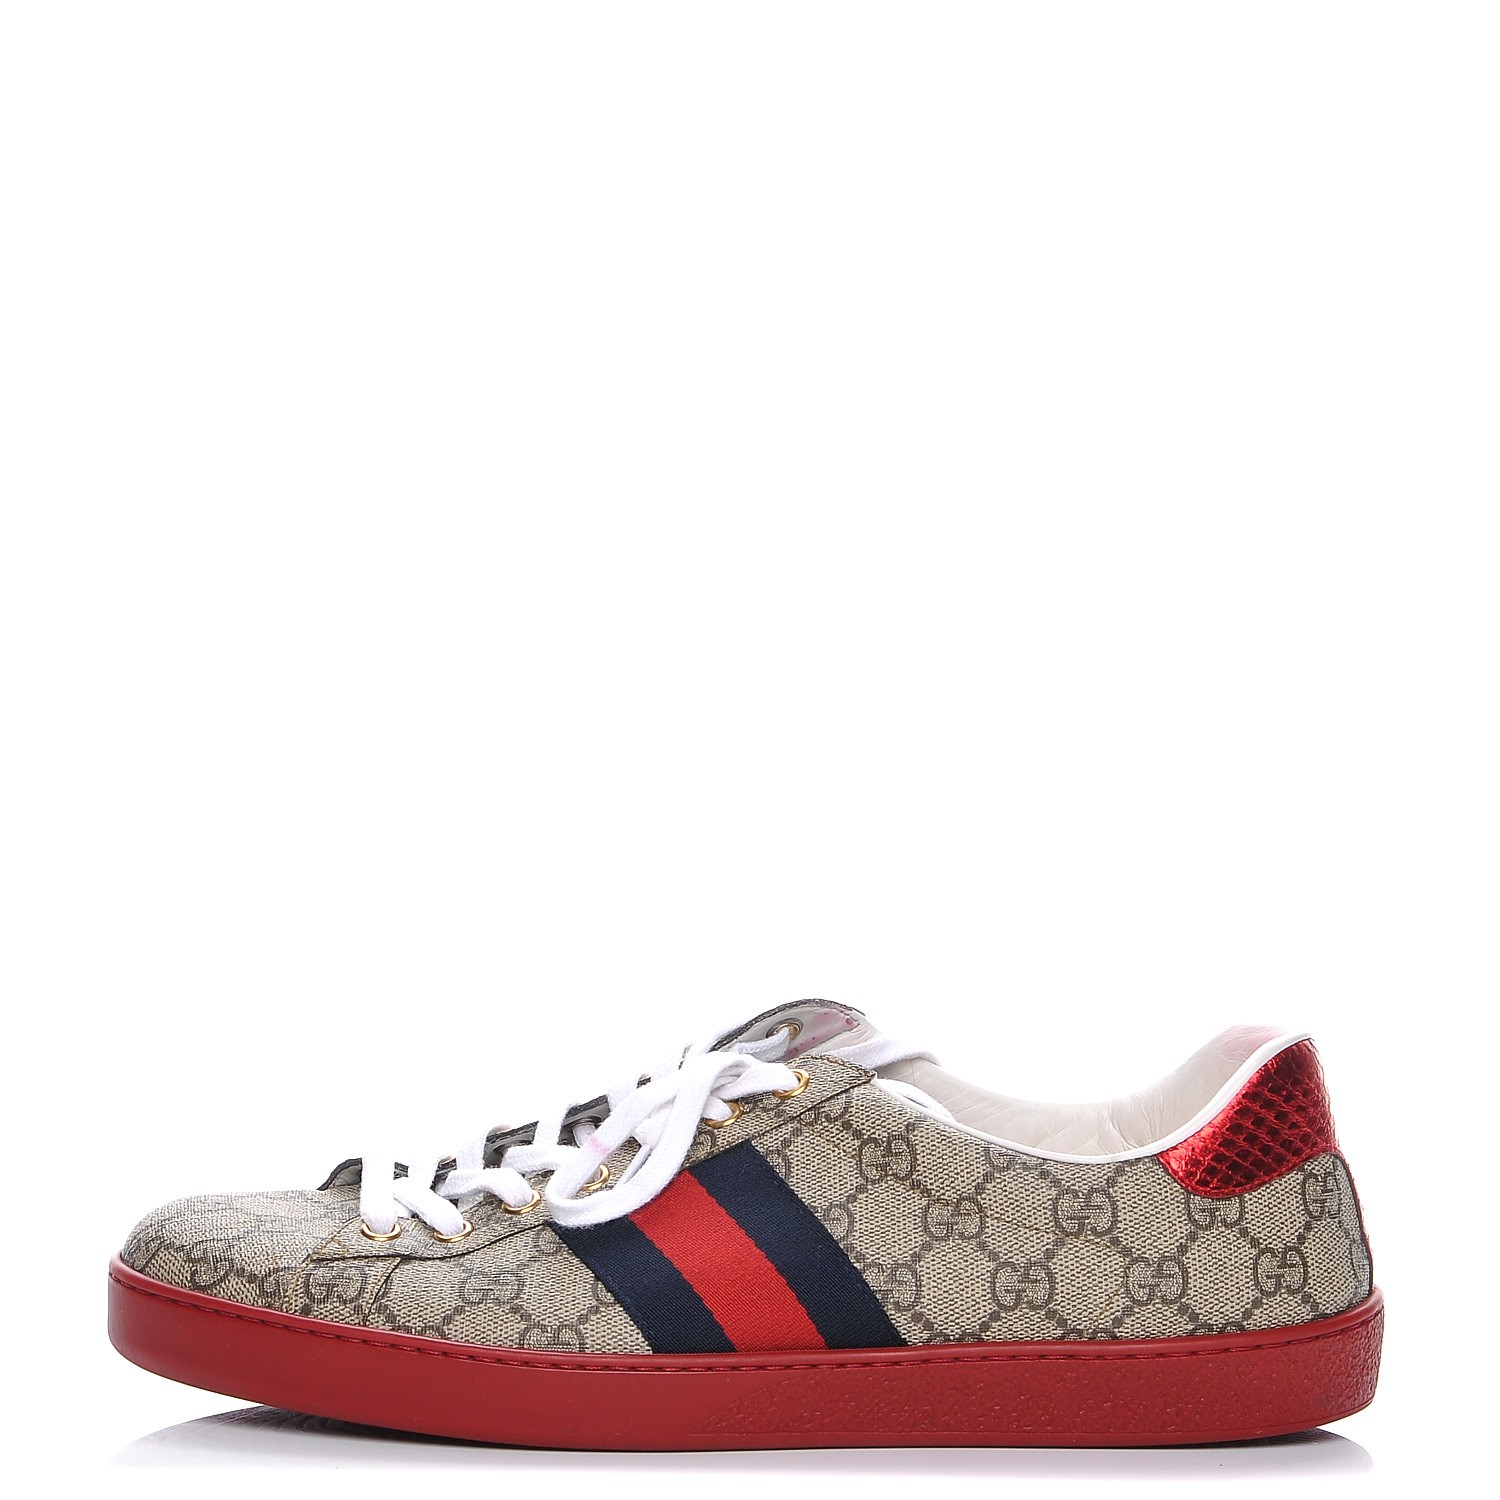 GUCCI Mens Monogram New Ace GG Supreme Low-Top Sneaker 9.5 Beige Red 207815